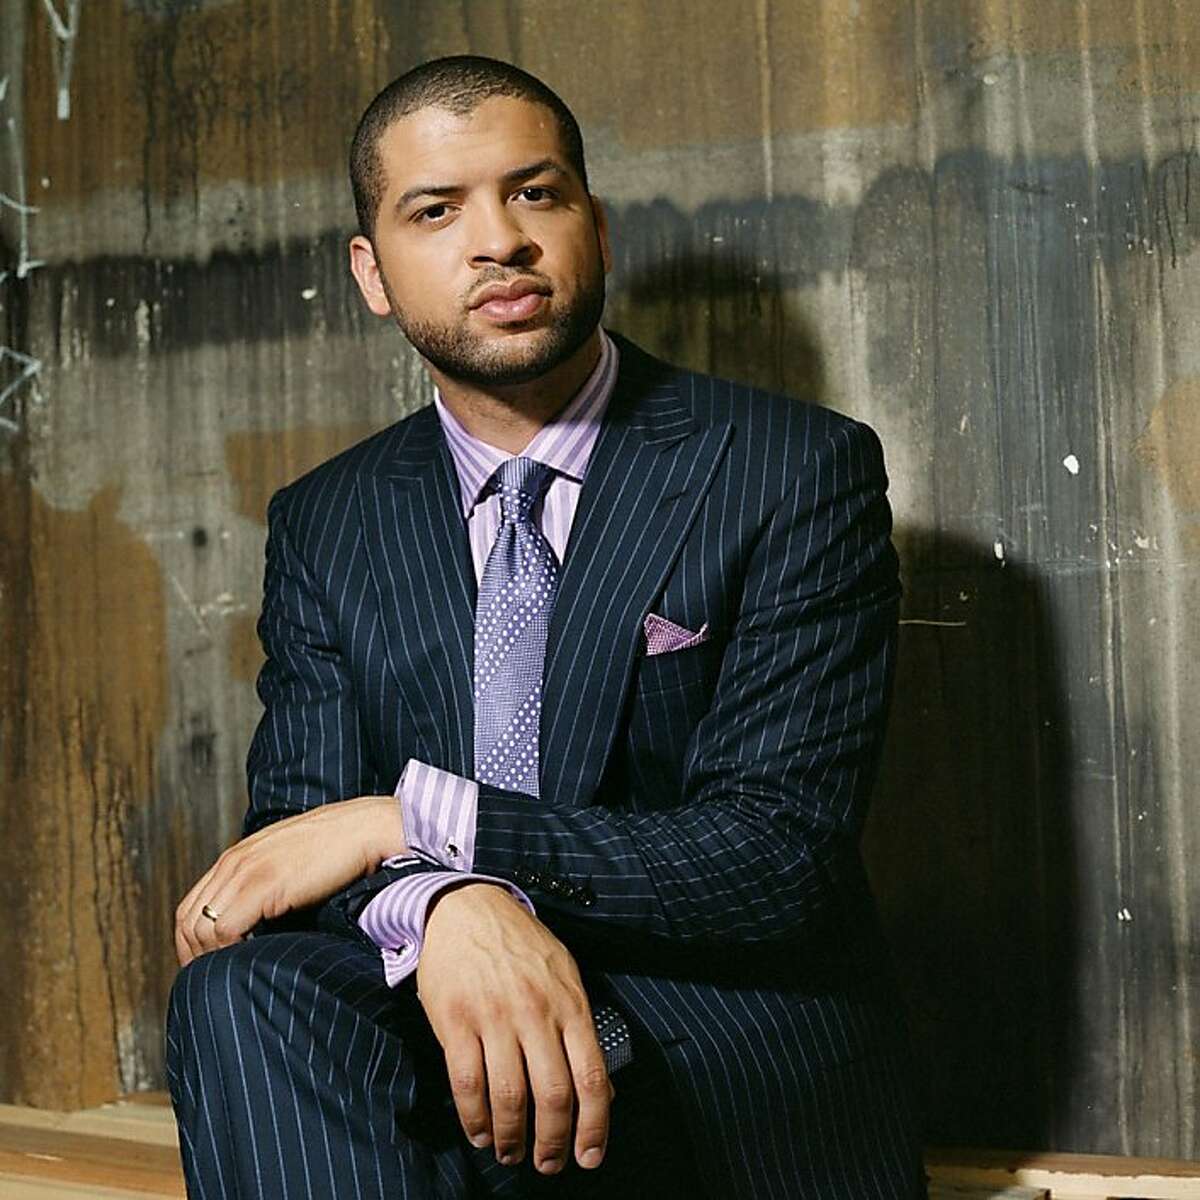 Jazz pianist and composer Jason Moran is a resident artistic director for SFJAZZ Nov. 20 through Nov. 25. The residency culminates with a concert featuring Moran and his wife, Alicia Hall Moran, who stars as Bess in the national tour of "The Gershwins' Porgy and Bess" at the Golden Gate Theatre. Photo by Patrick McBride